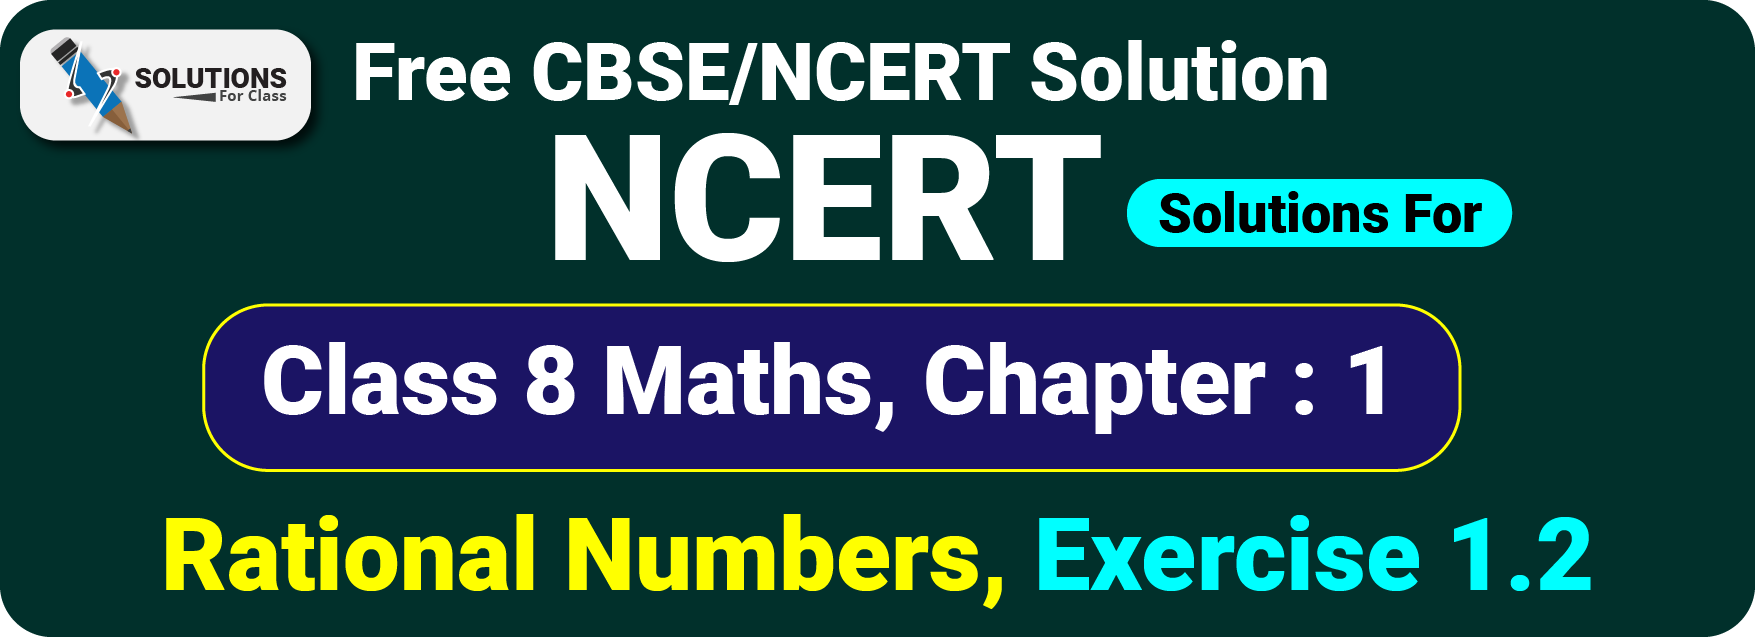 NCERT Solutions Class 8 Ch.1, Rational Numbers Ex.1.2